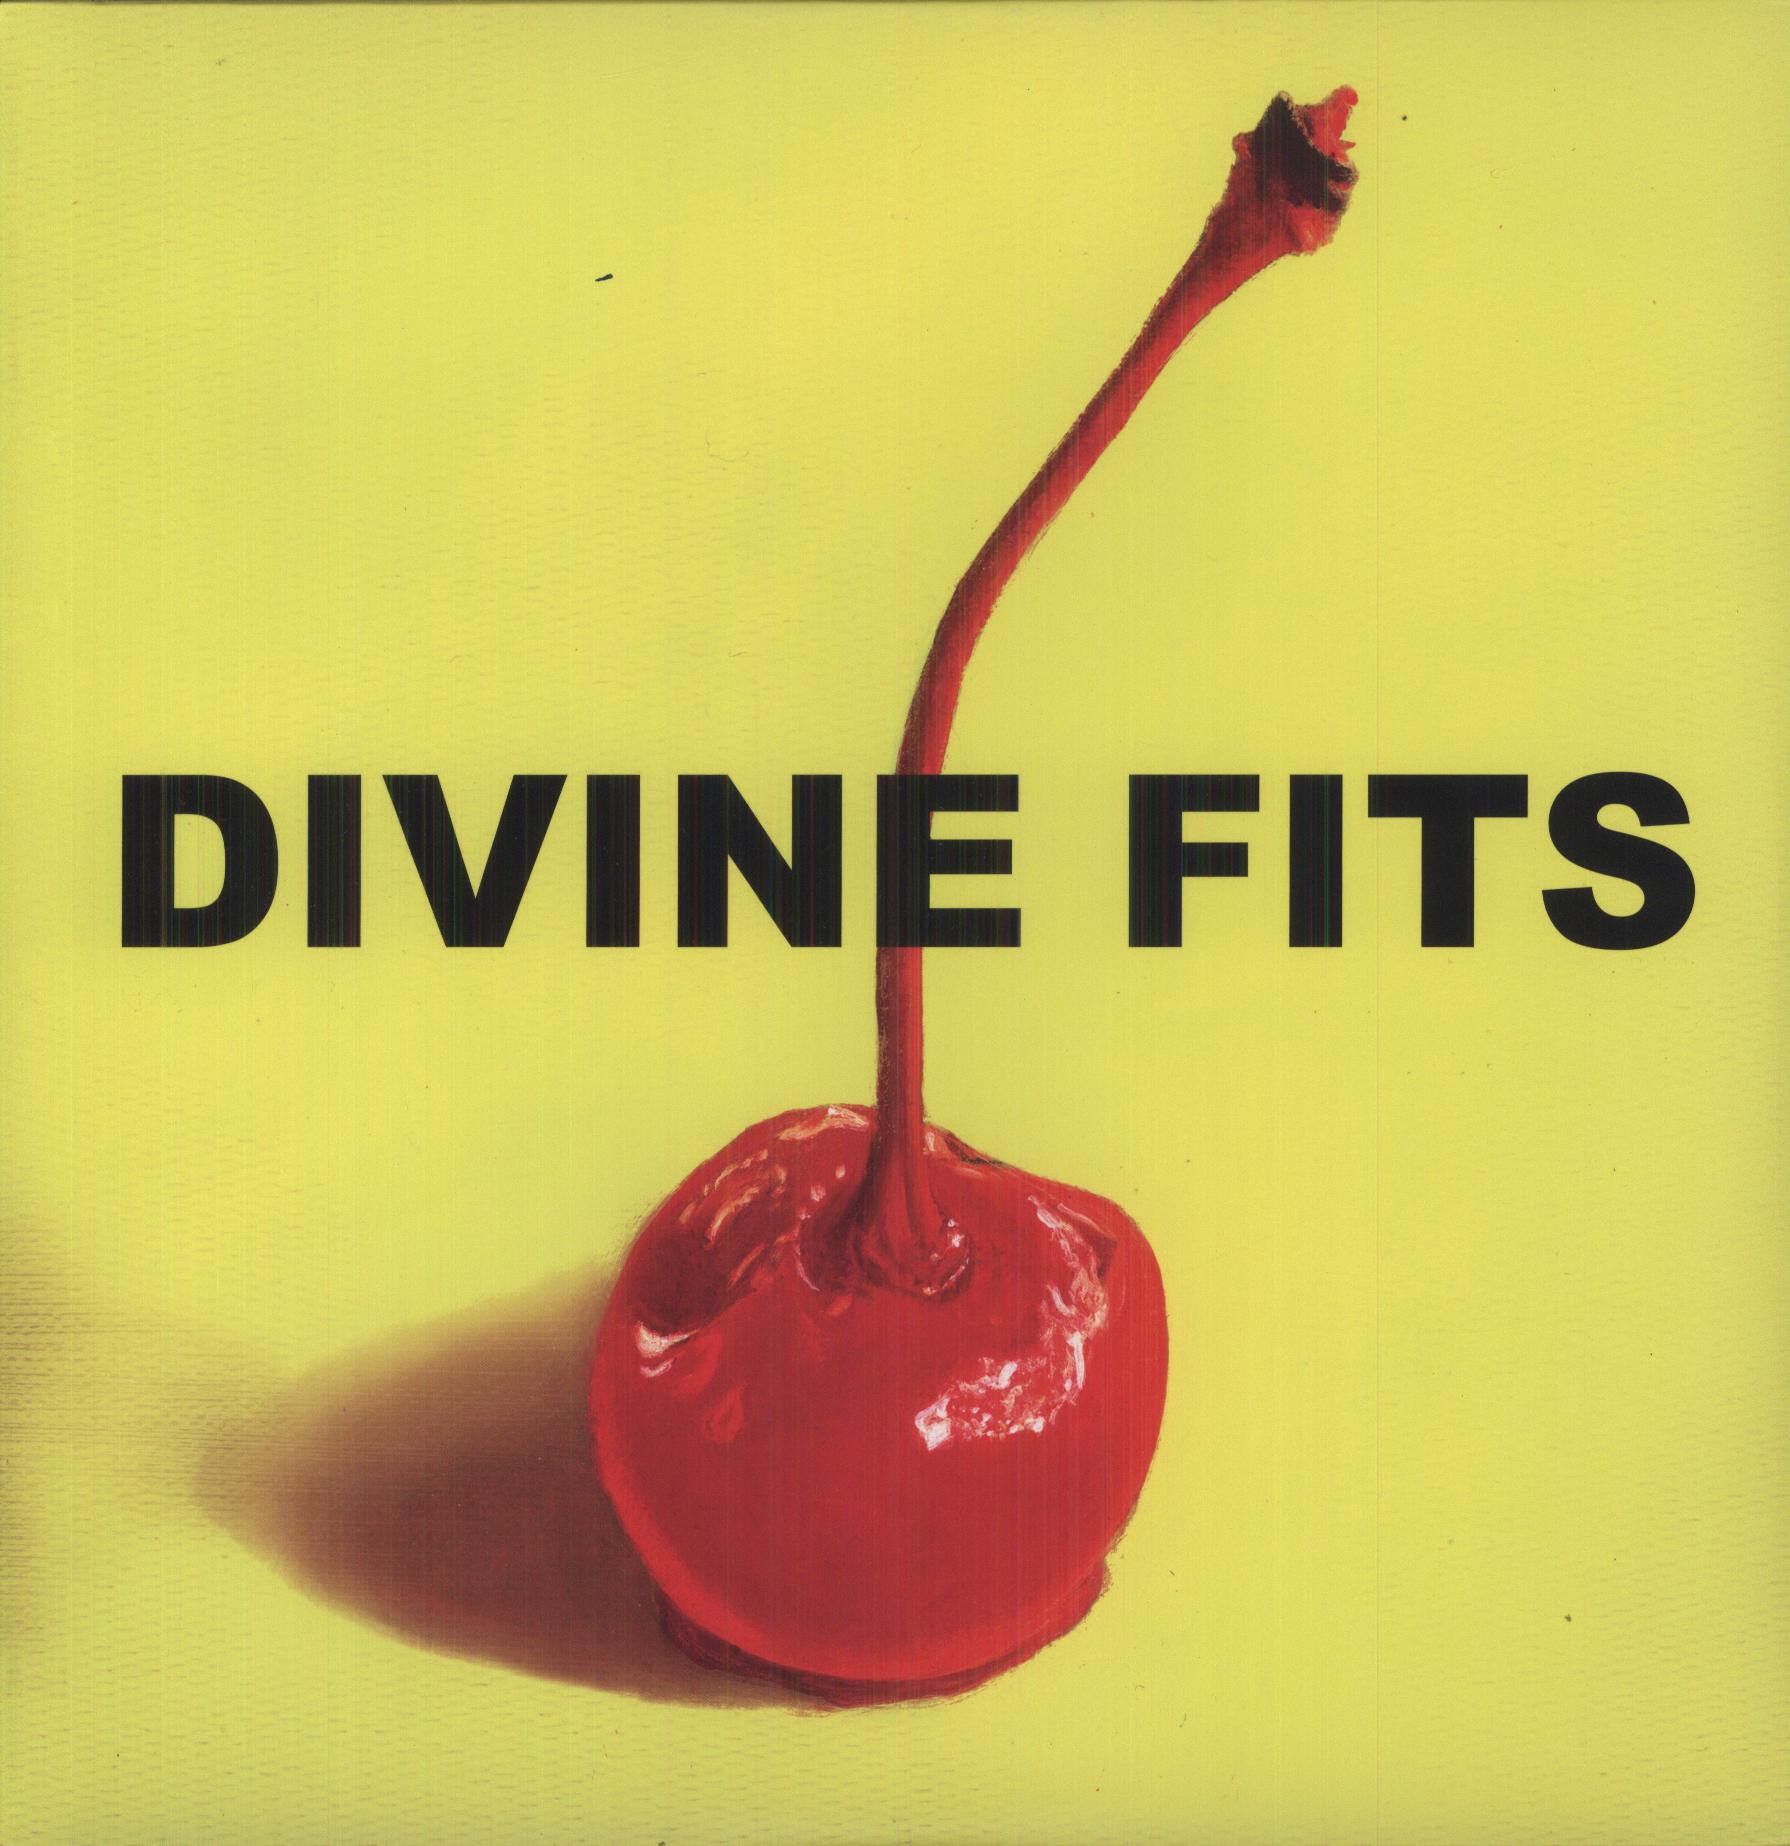 A THING CALLED DIVINE FITS